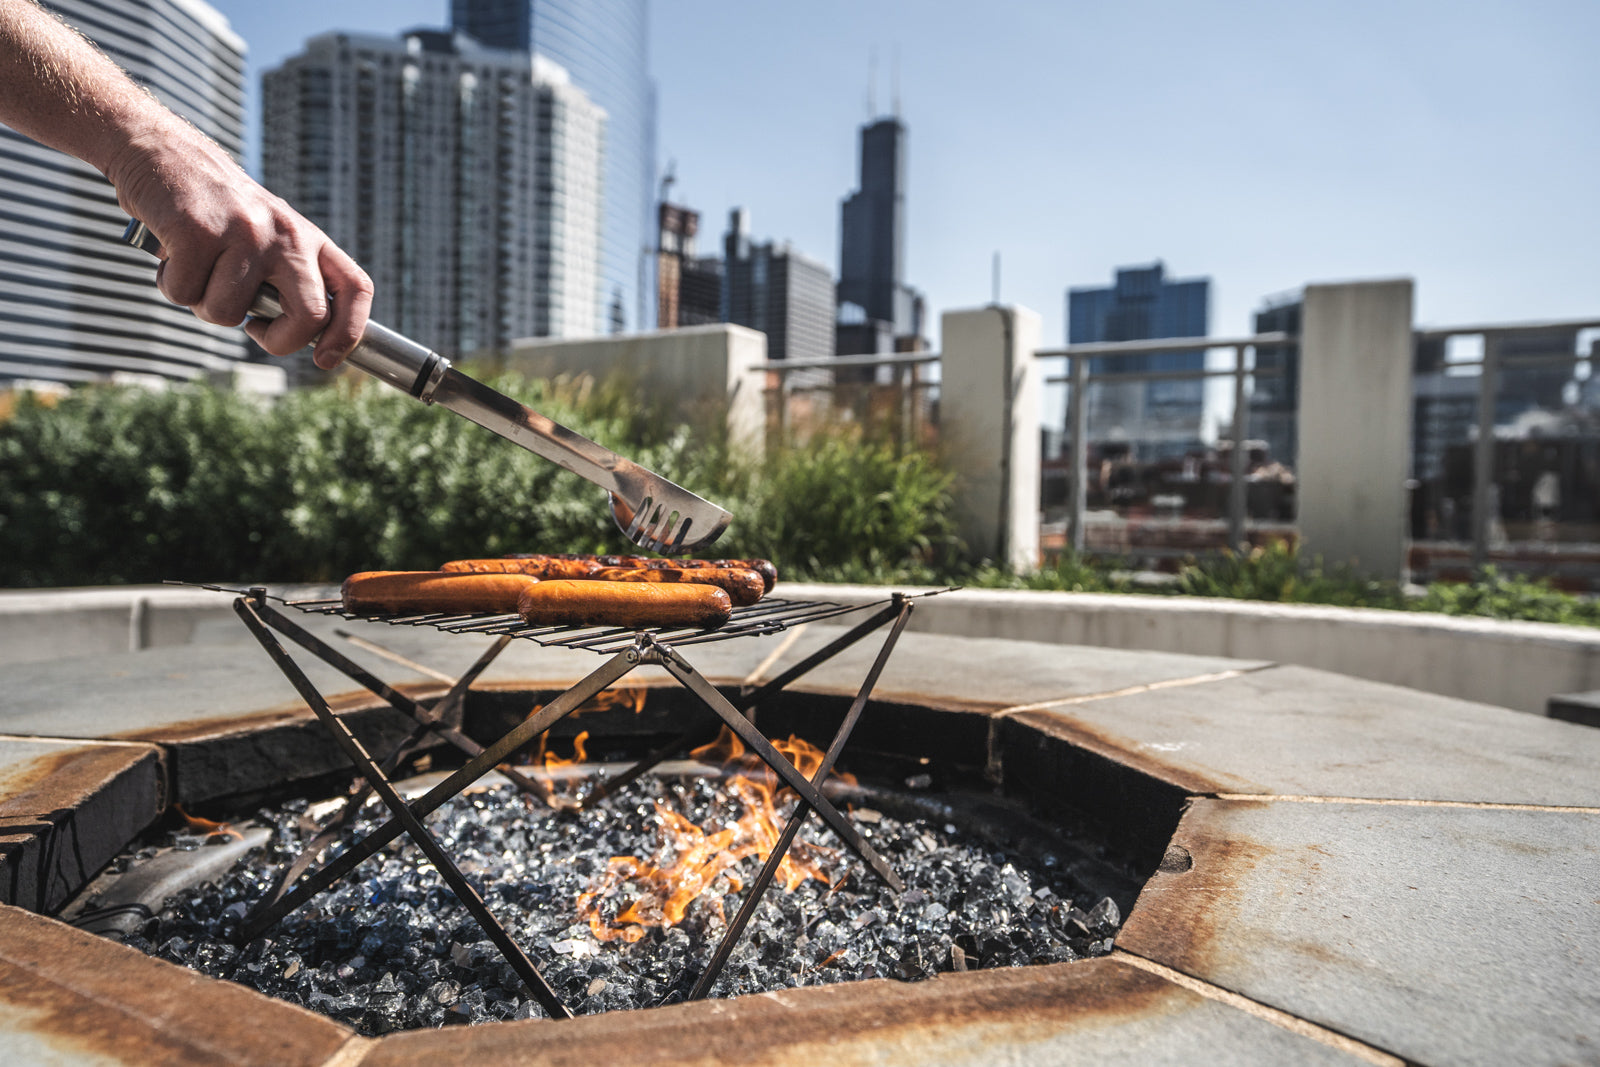 Grilling hotdogs over a rooftop fire pit in the city